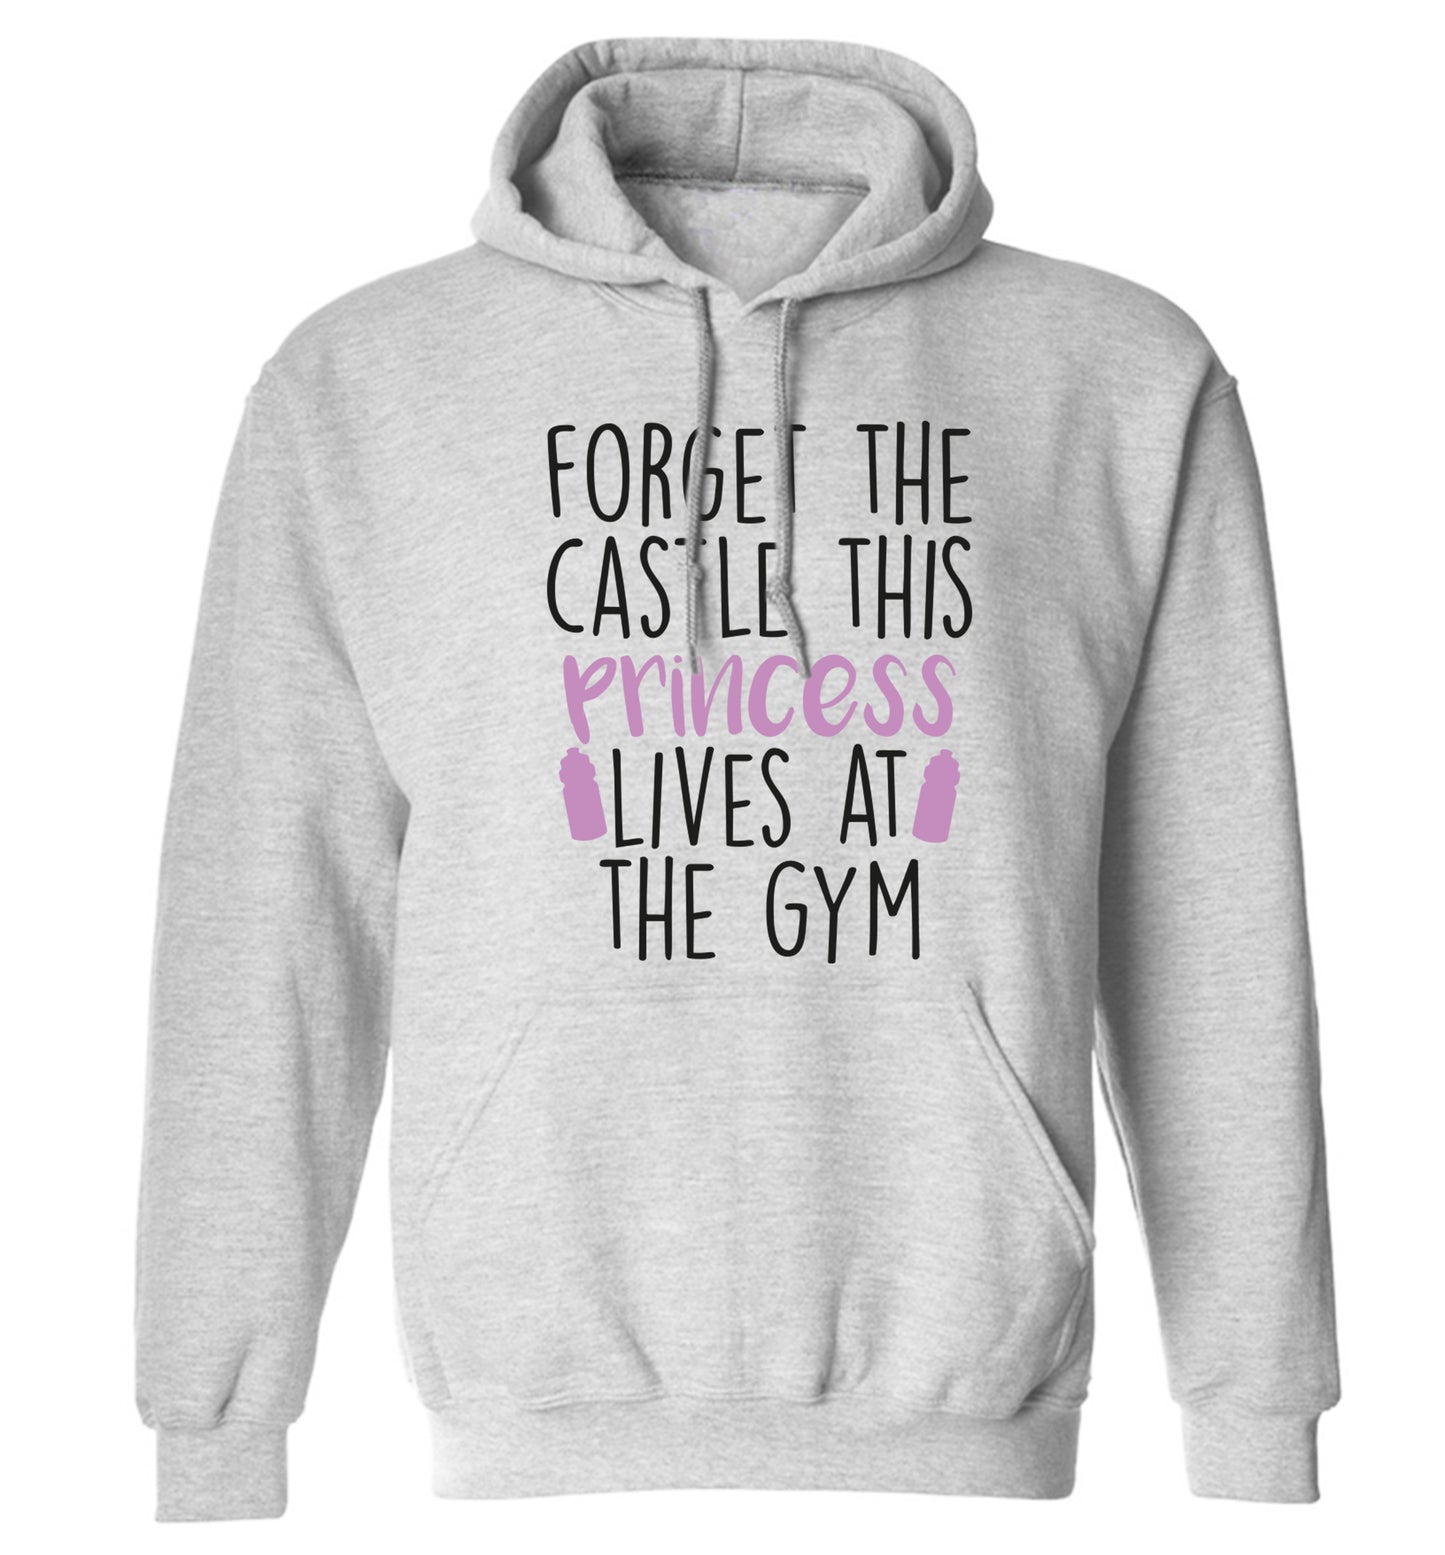 Forget the castle this princess lives at the gym adults unisex grey hoodie 2XL